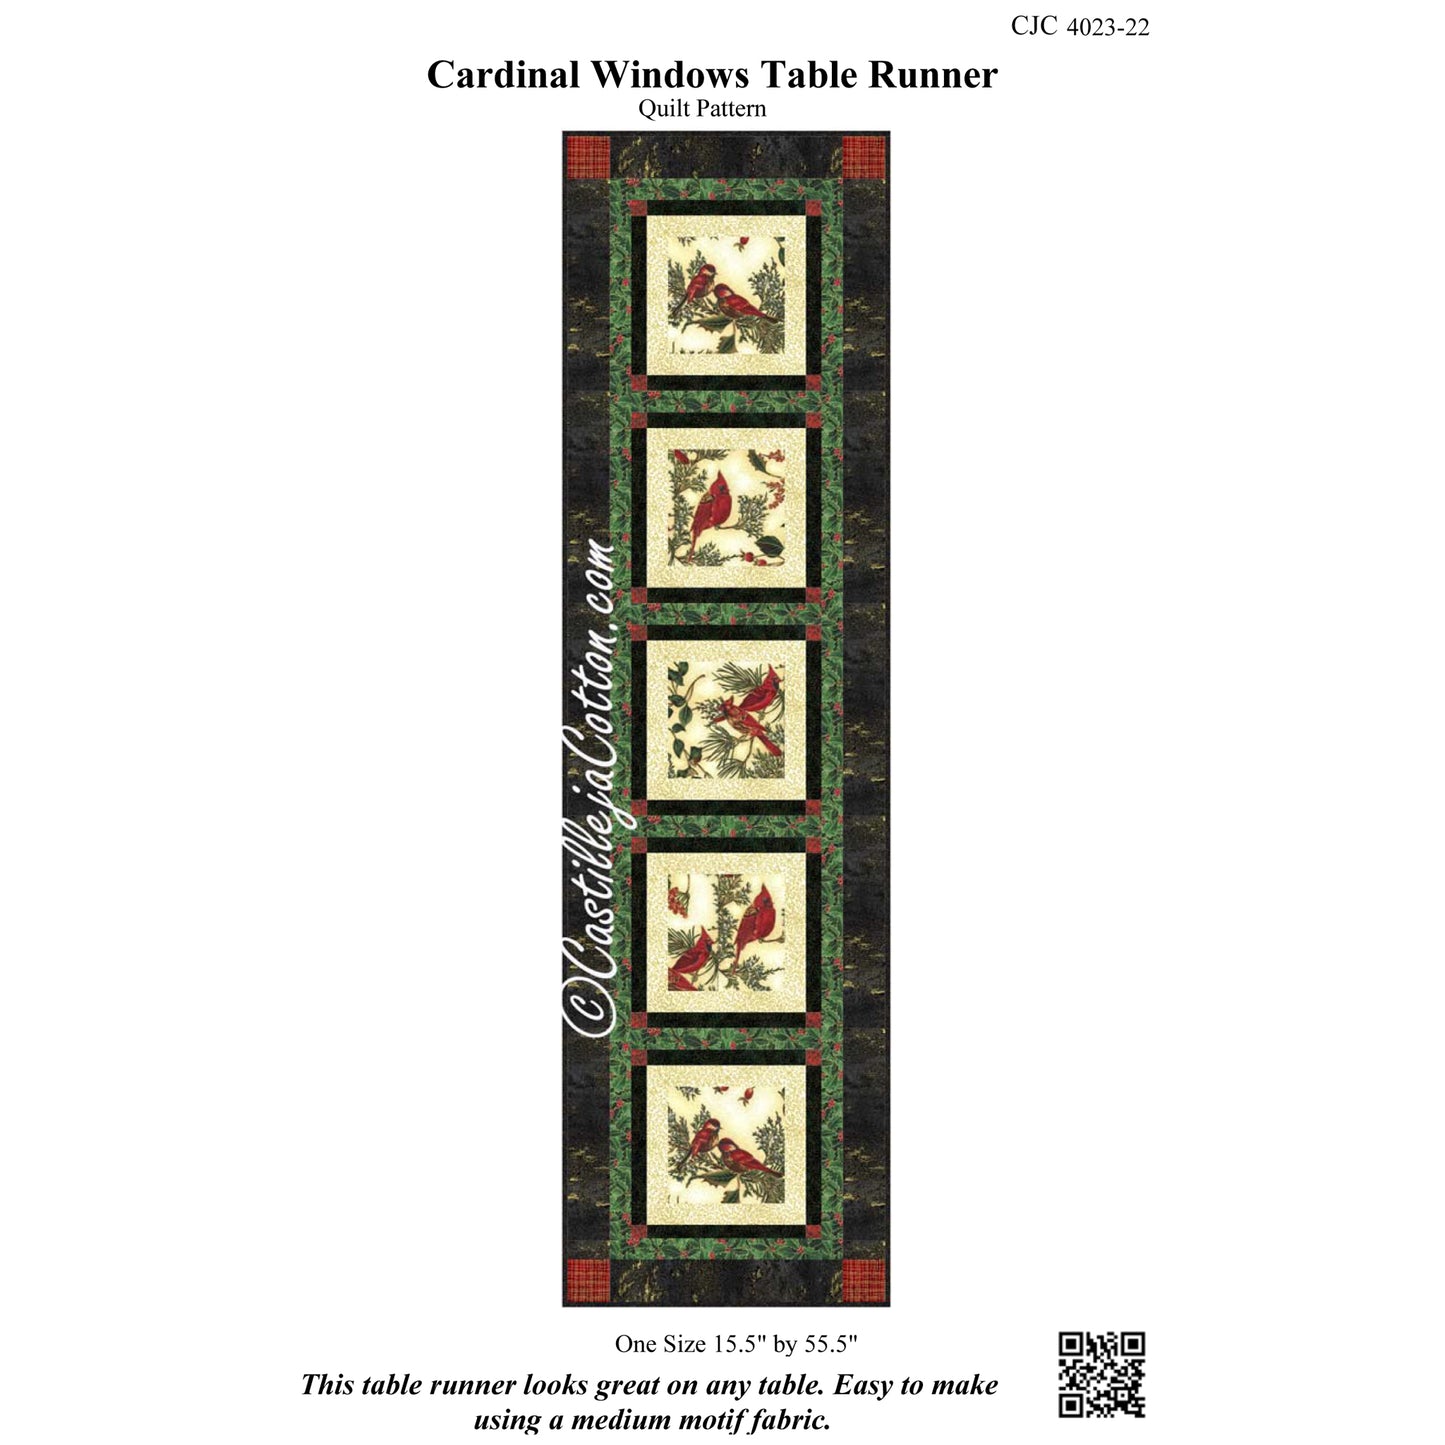 Cover image of pattern for Gold Cardinal Windows Table Runner.